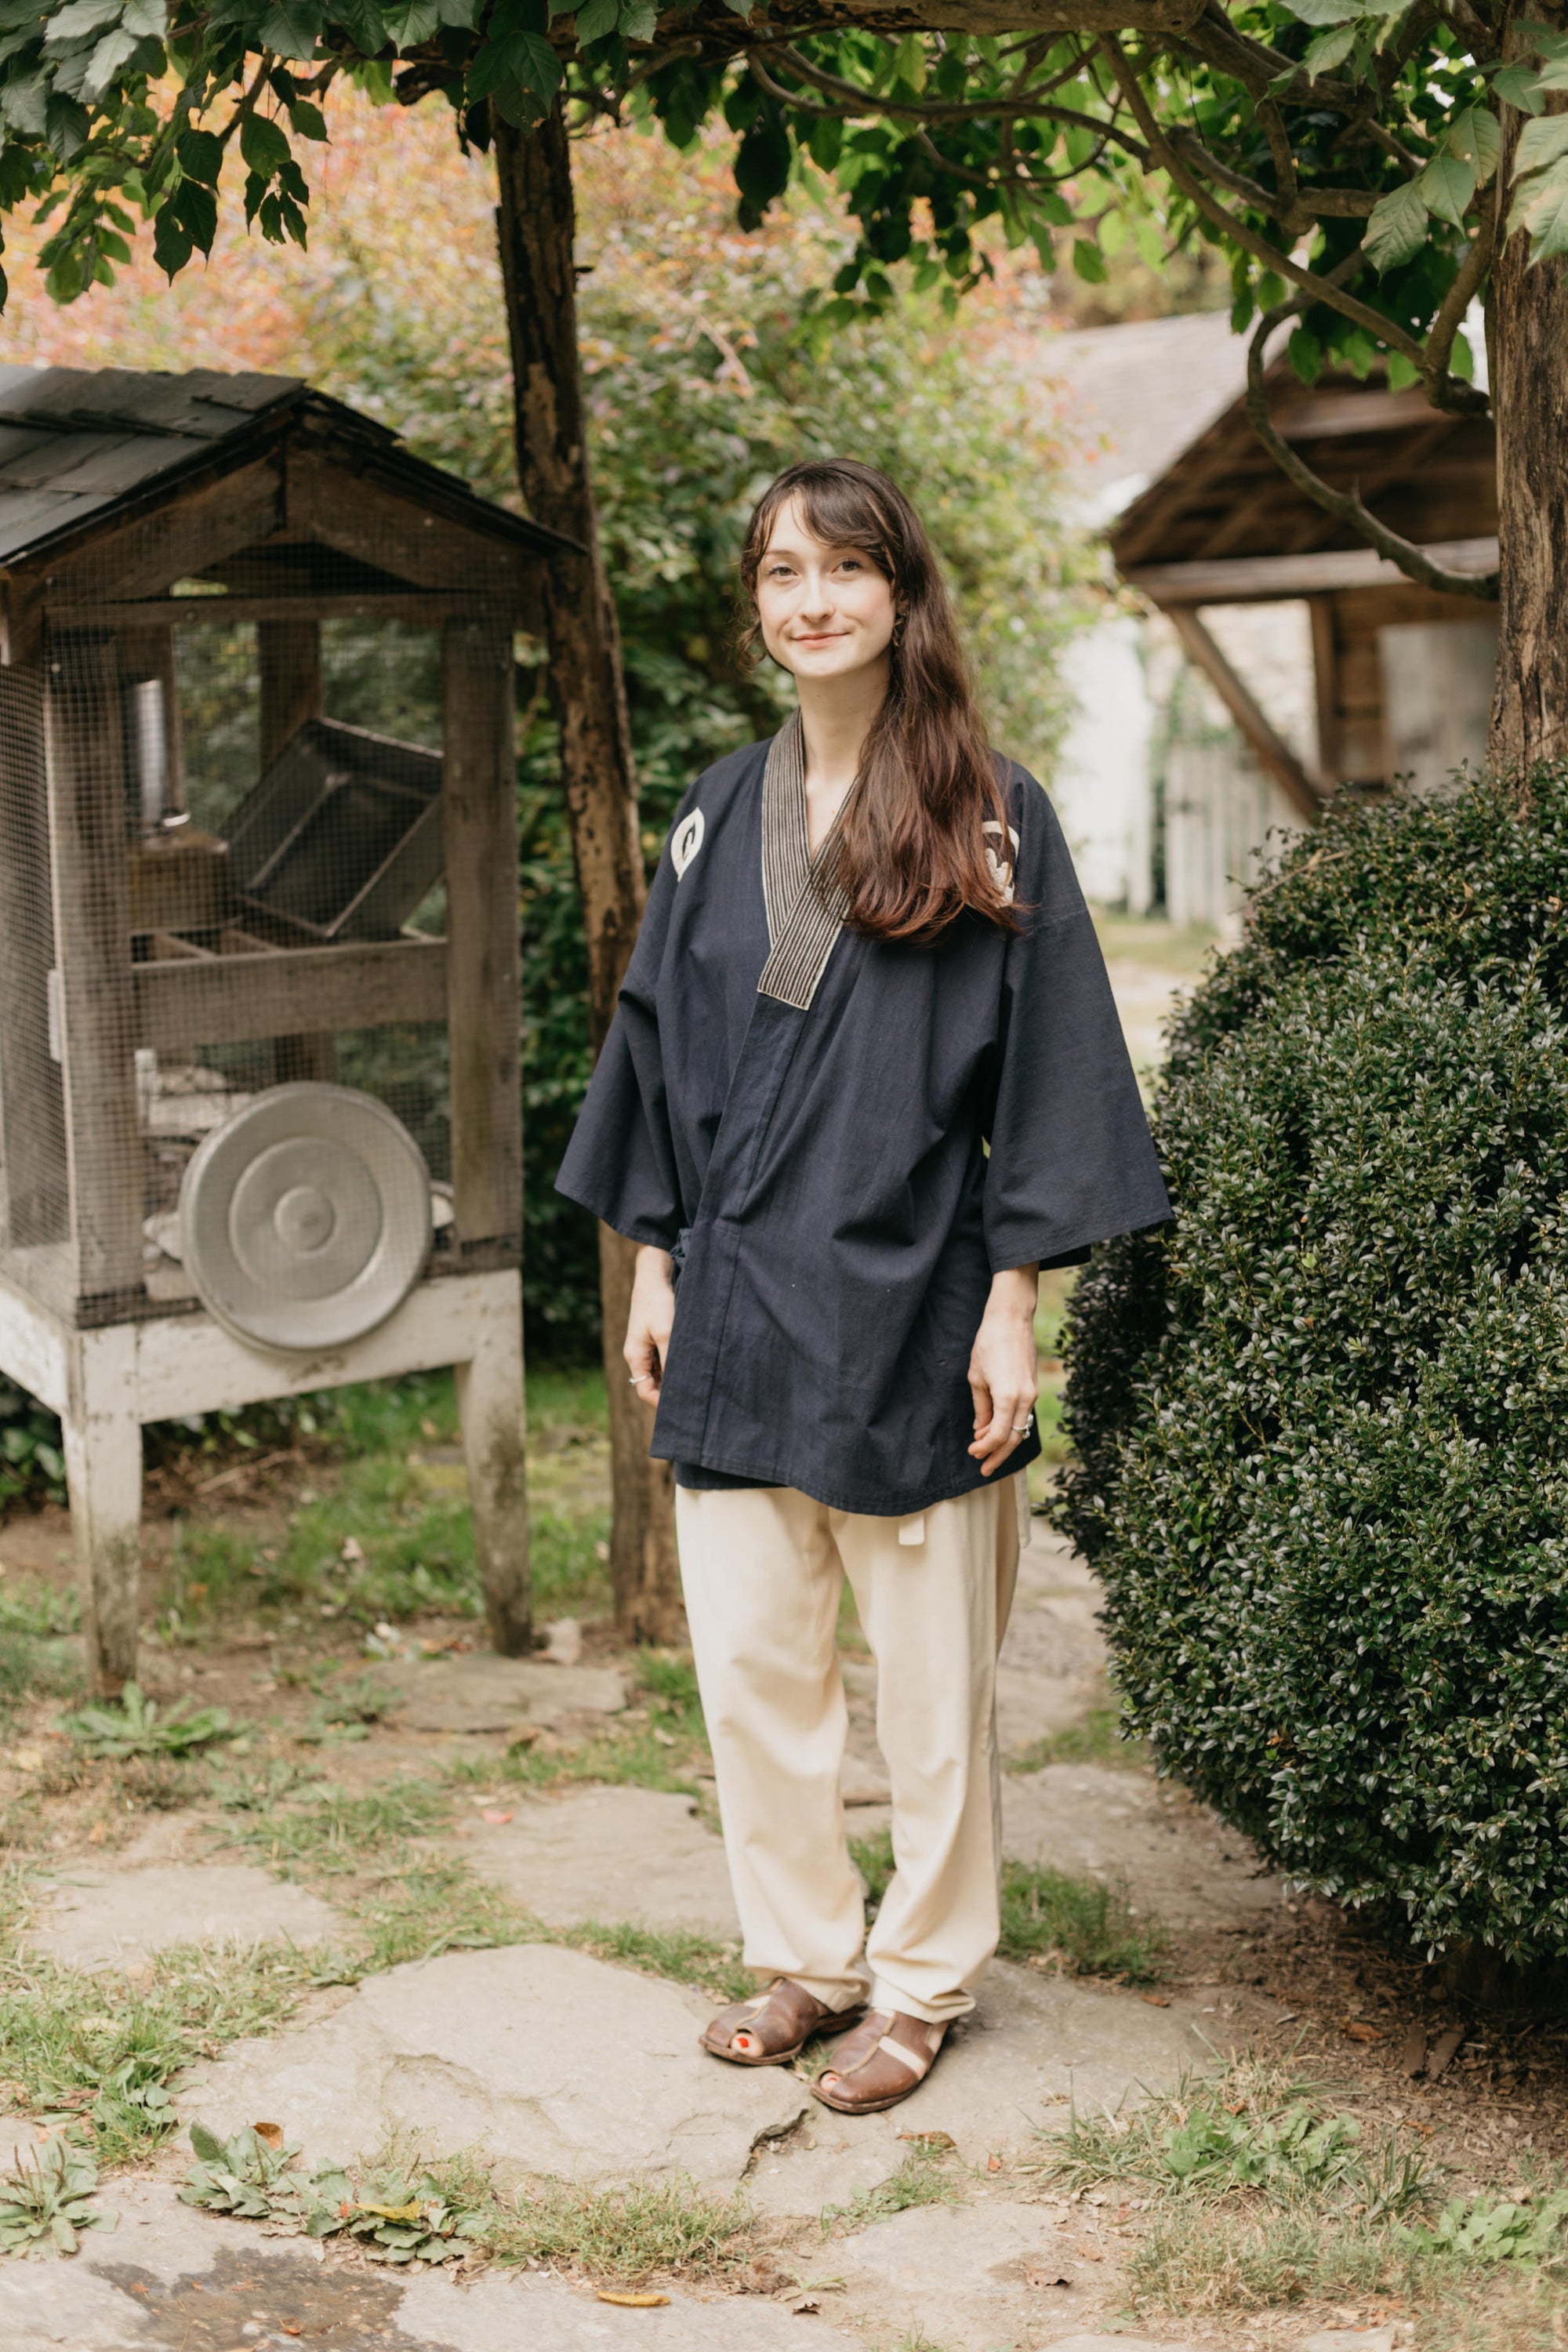 Japanese American woman wearing a navy blue Hippari and cream colored pants.  Standing outside by a shrub.